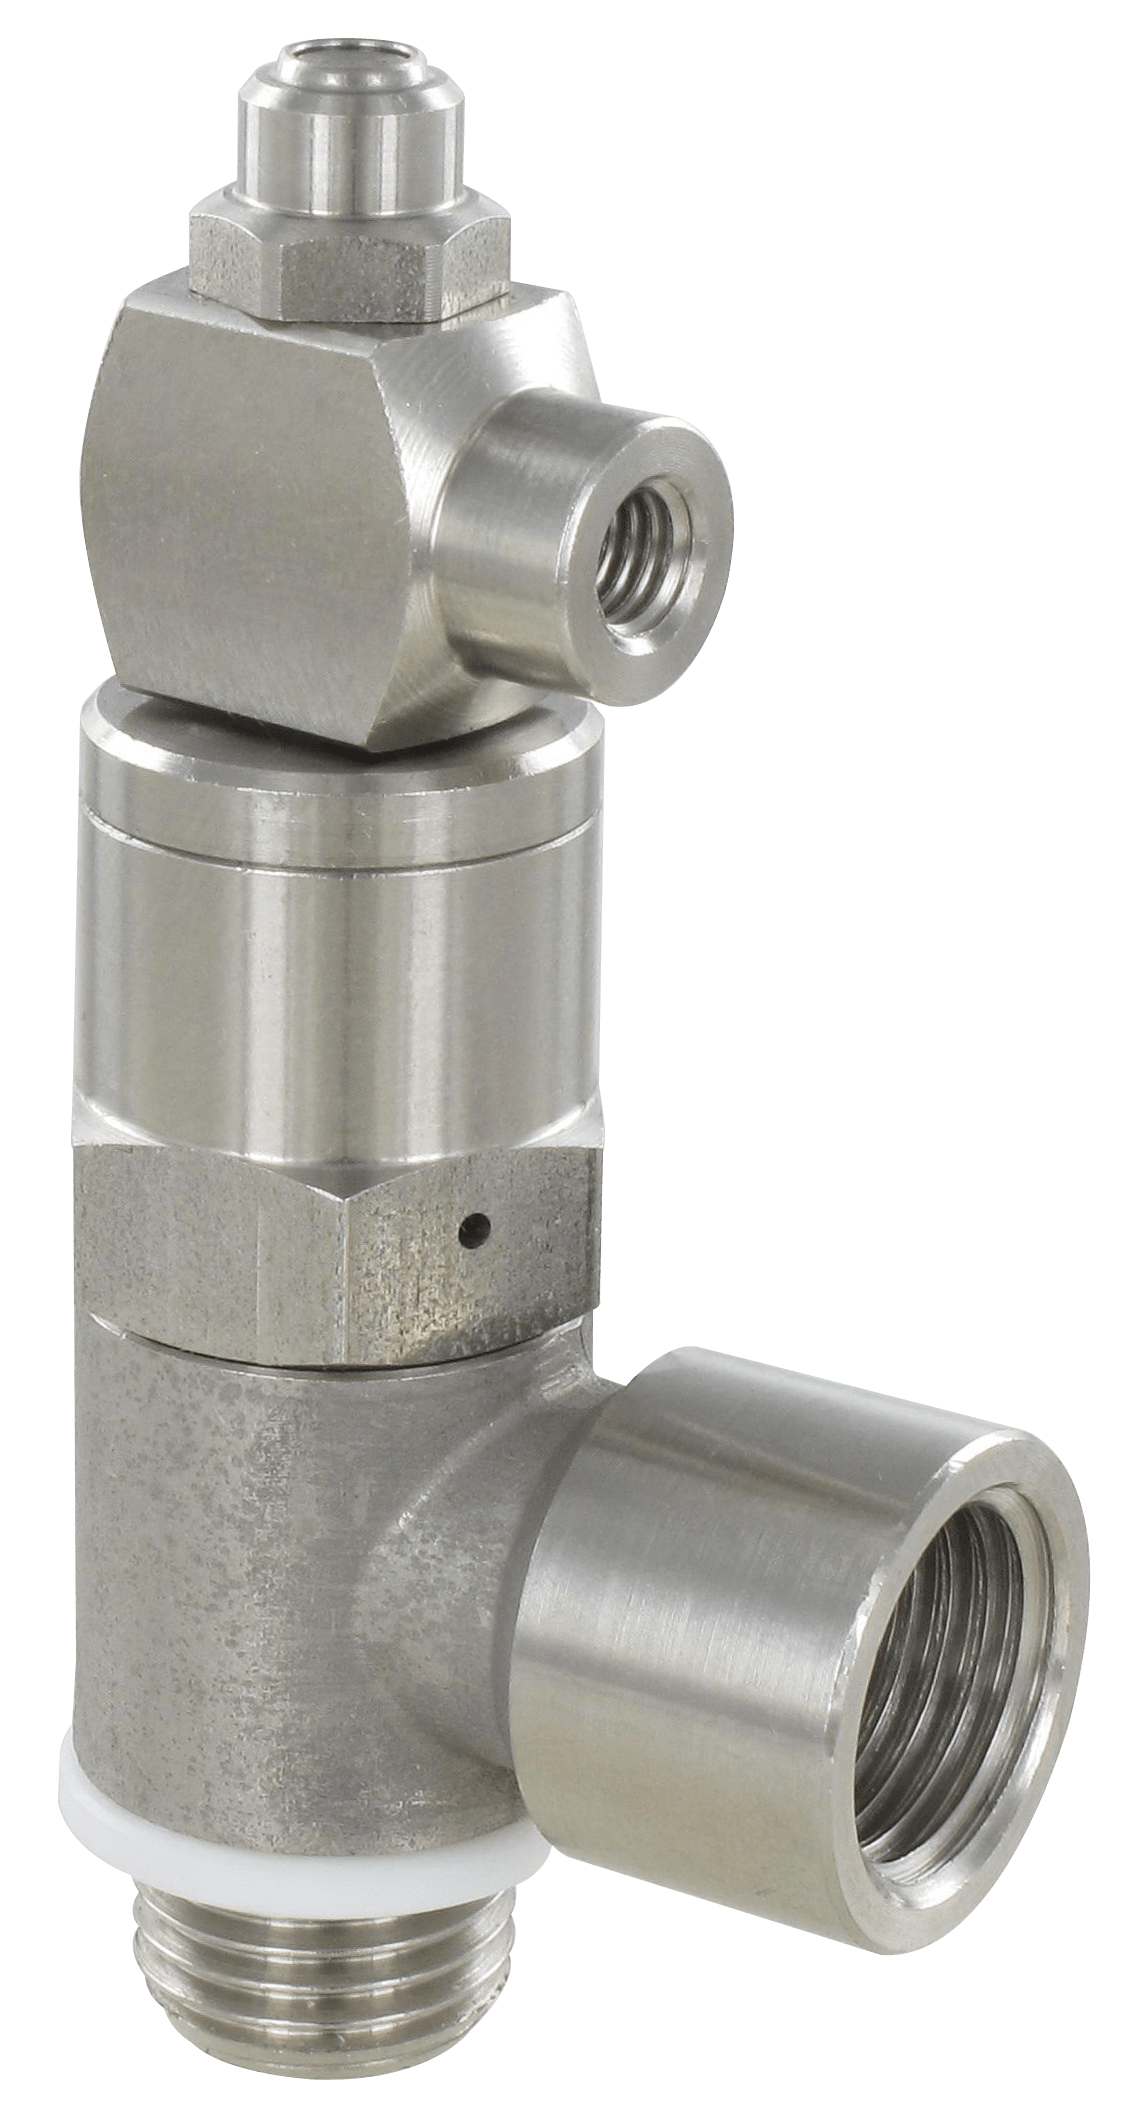 Stainless steel pilot operated check valve